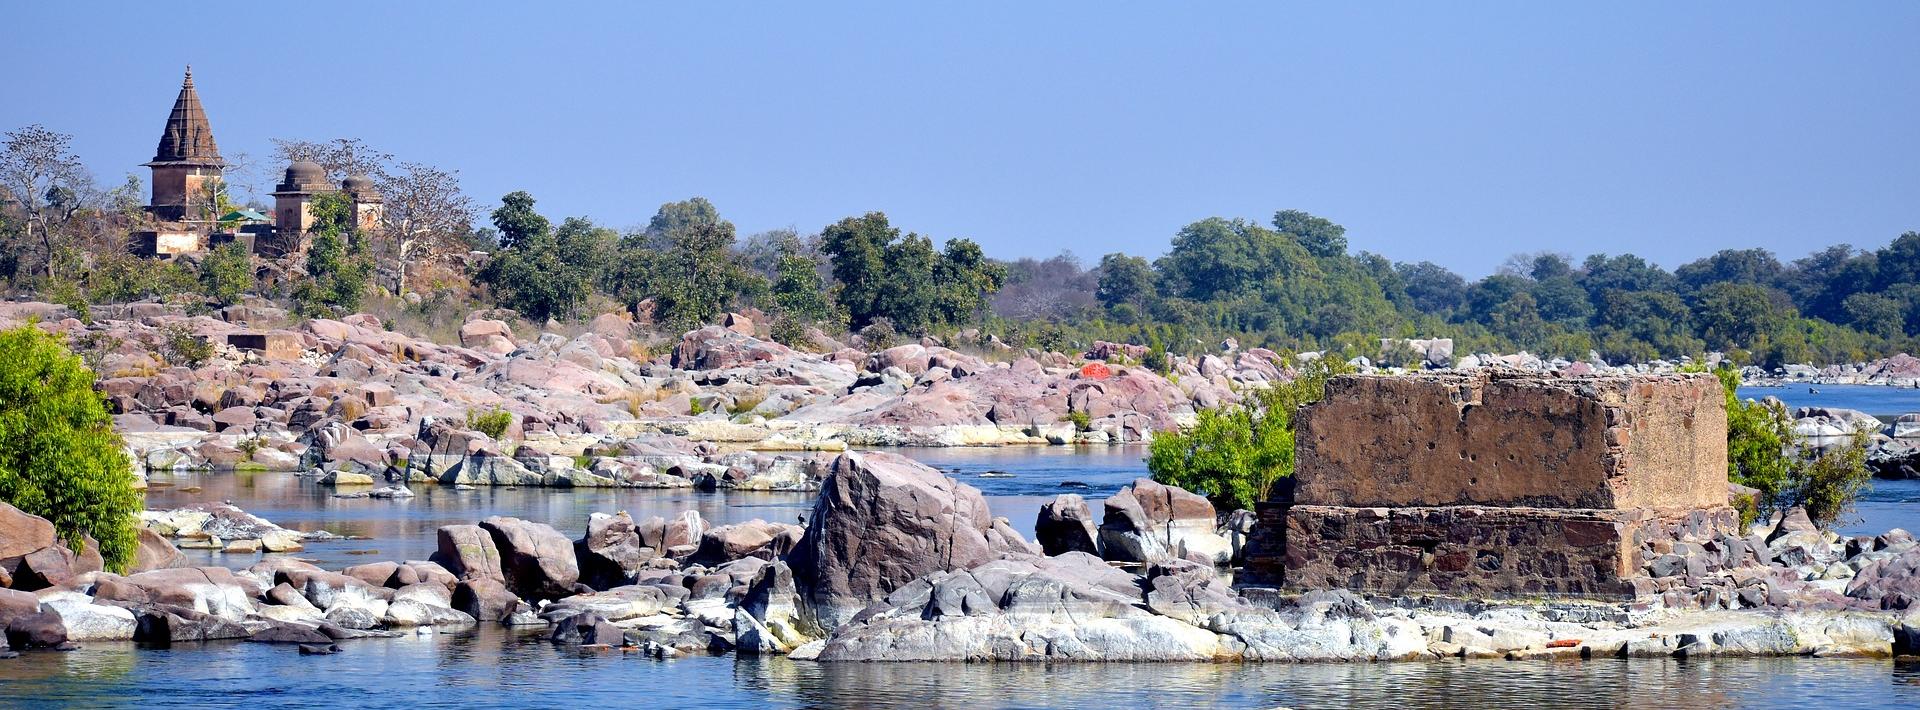 The rocky banks of the Betwa river